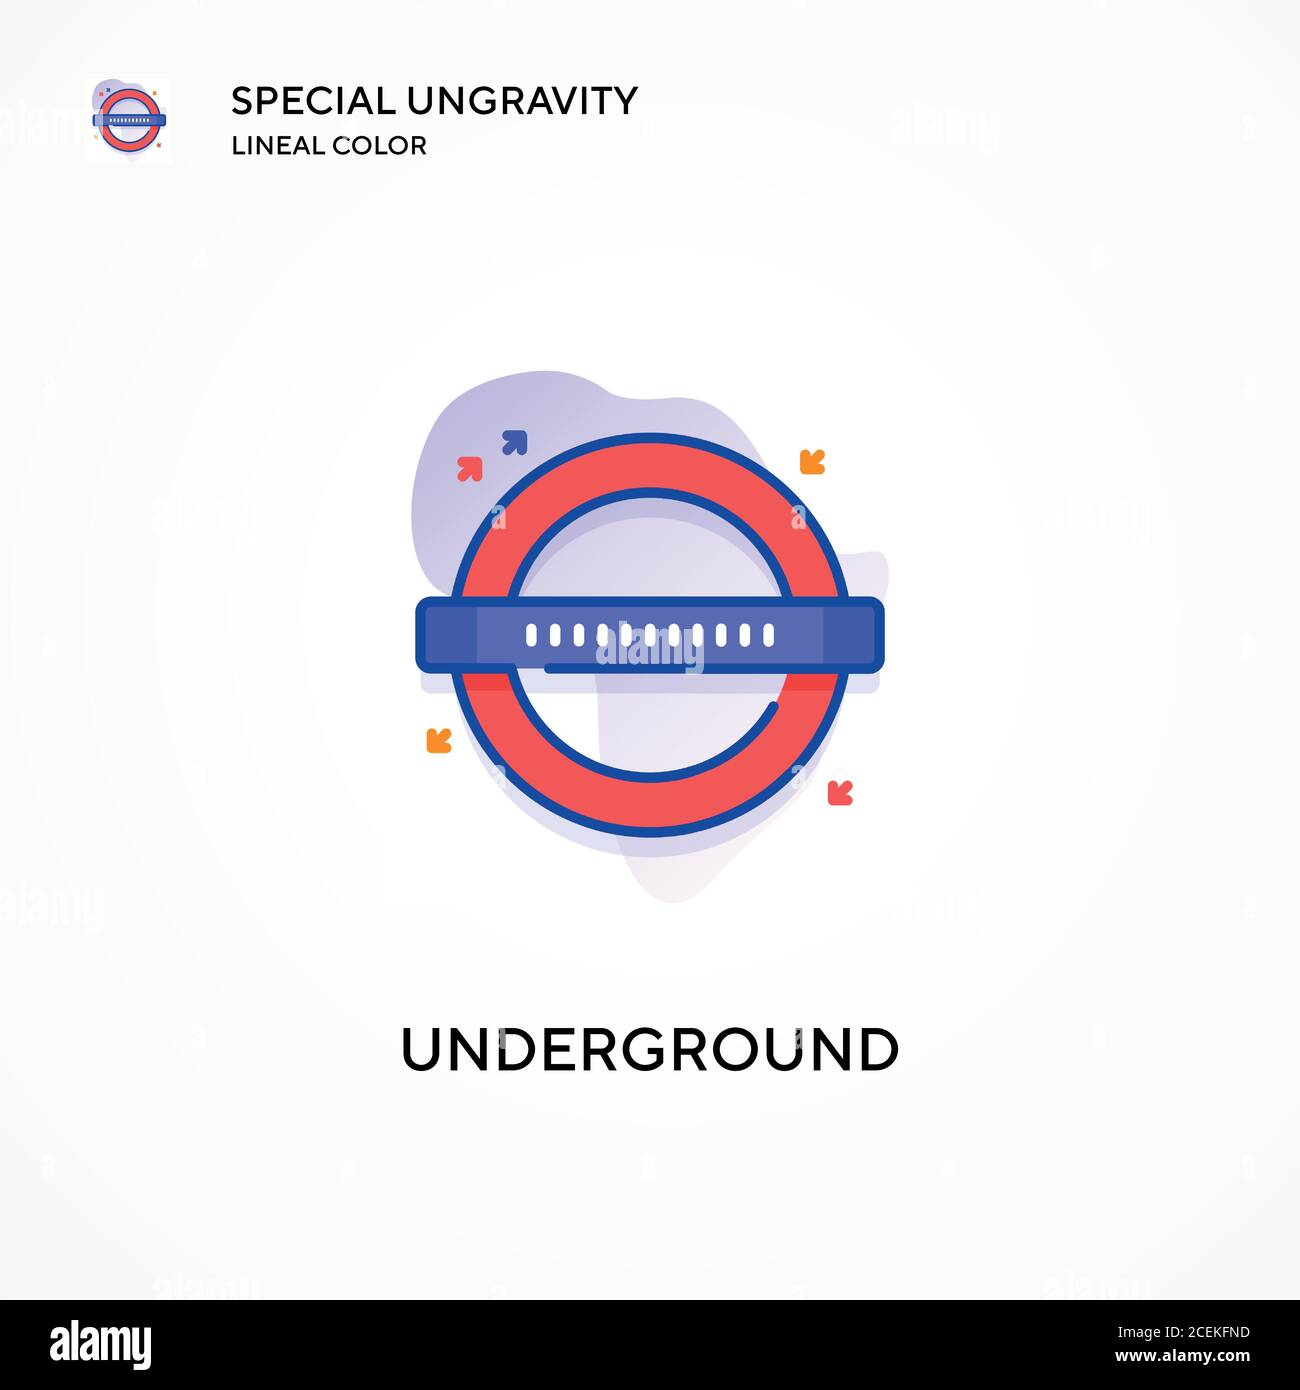 Underground special ungravity lineal color icon. Modern vector illustration concepts. Easy to edit and customize. Stock Vector